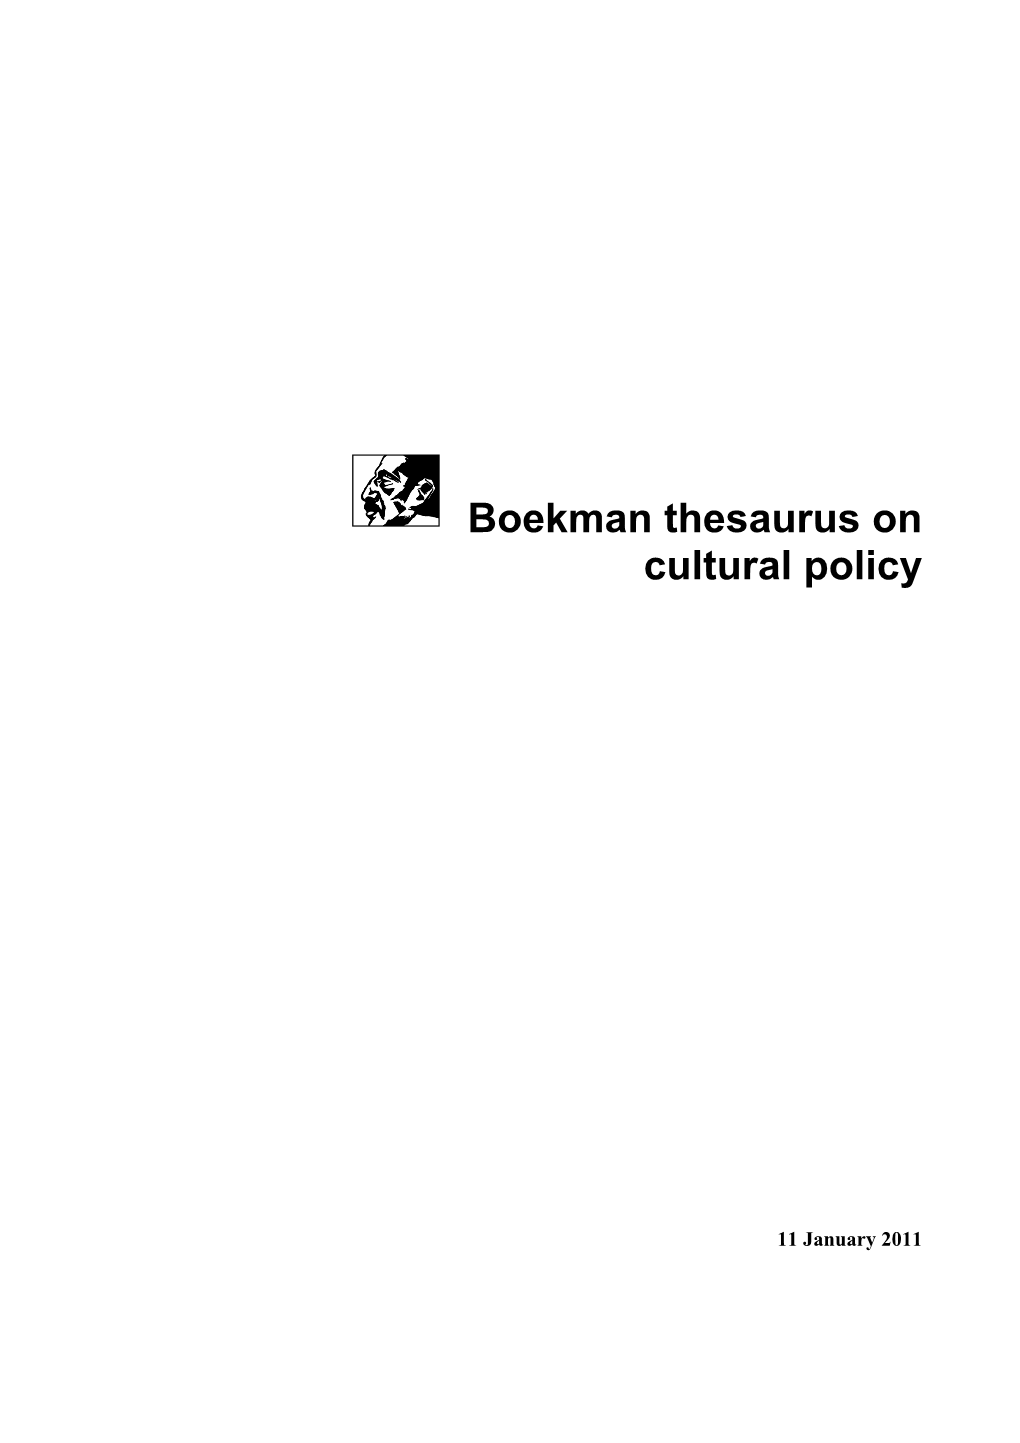 Boekman Thesaurus on Cultural Policy